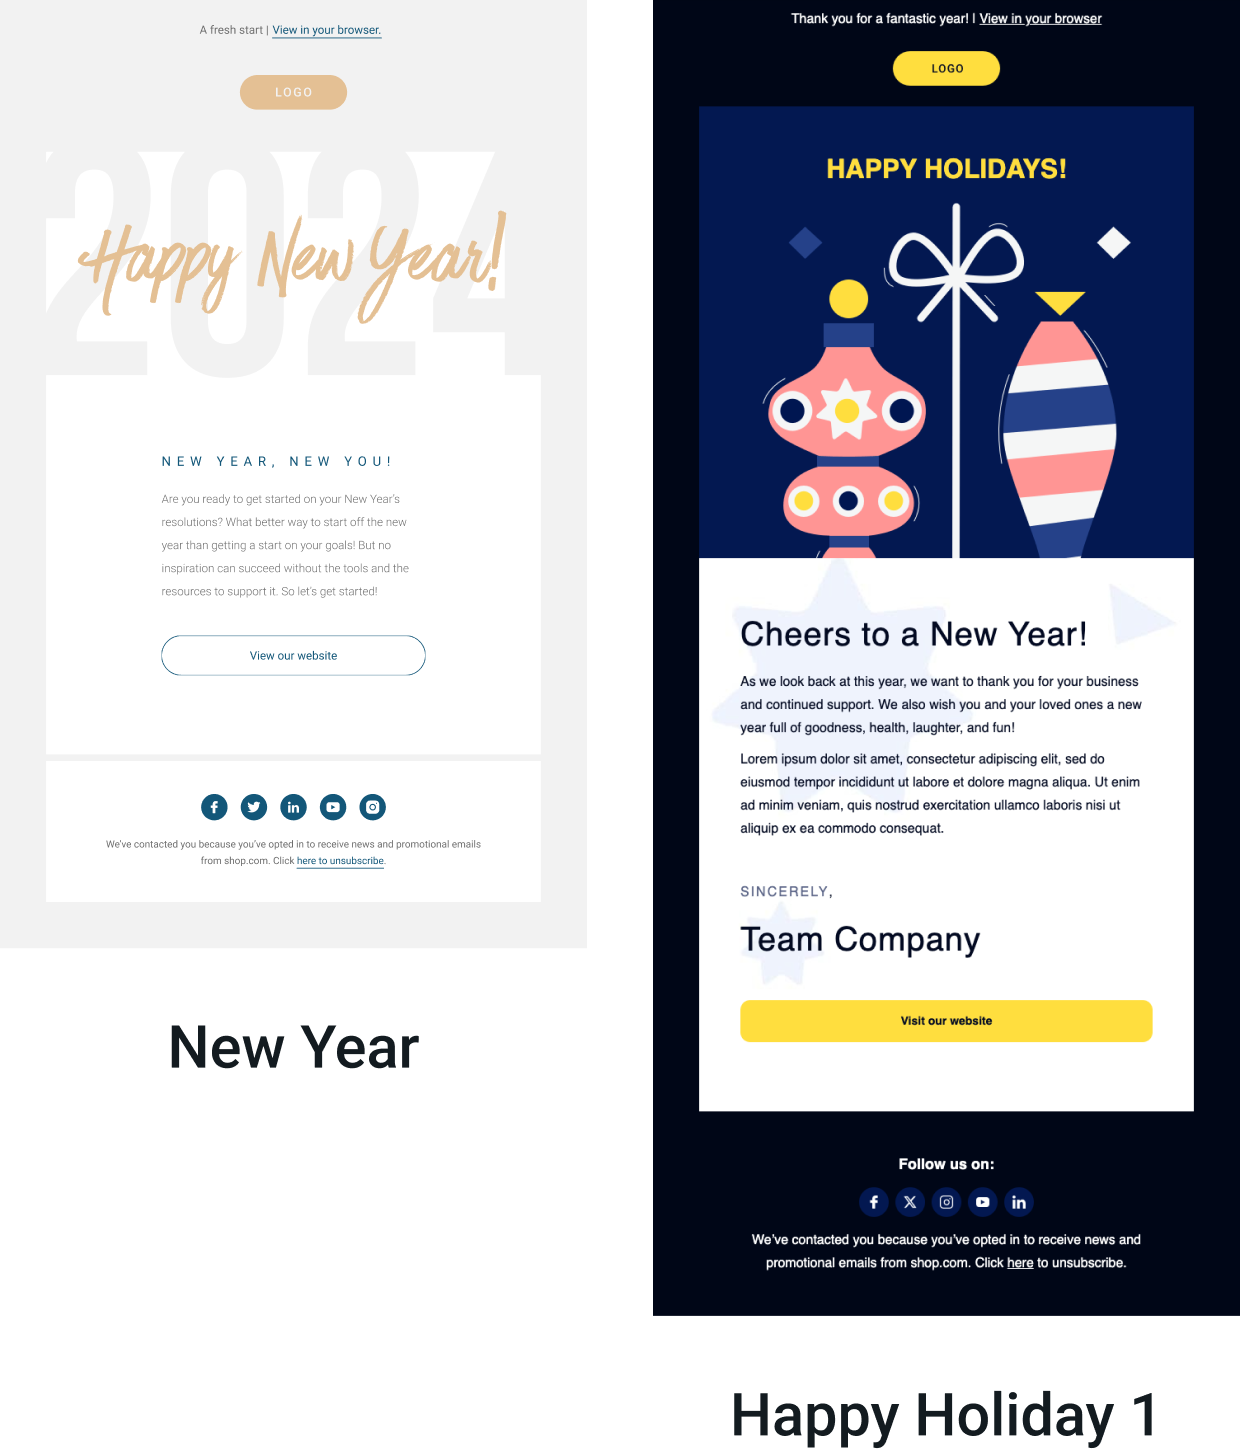 Season’s greetings templates from Mailjet’s template gallery